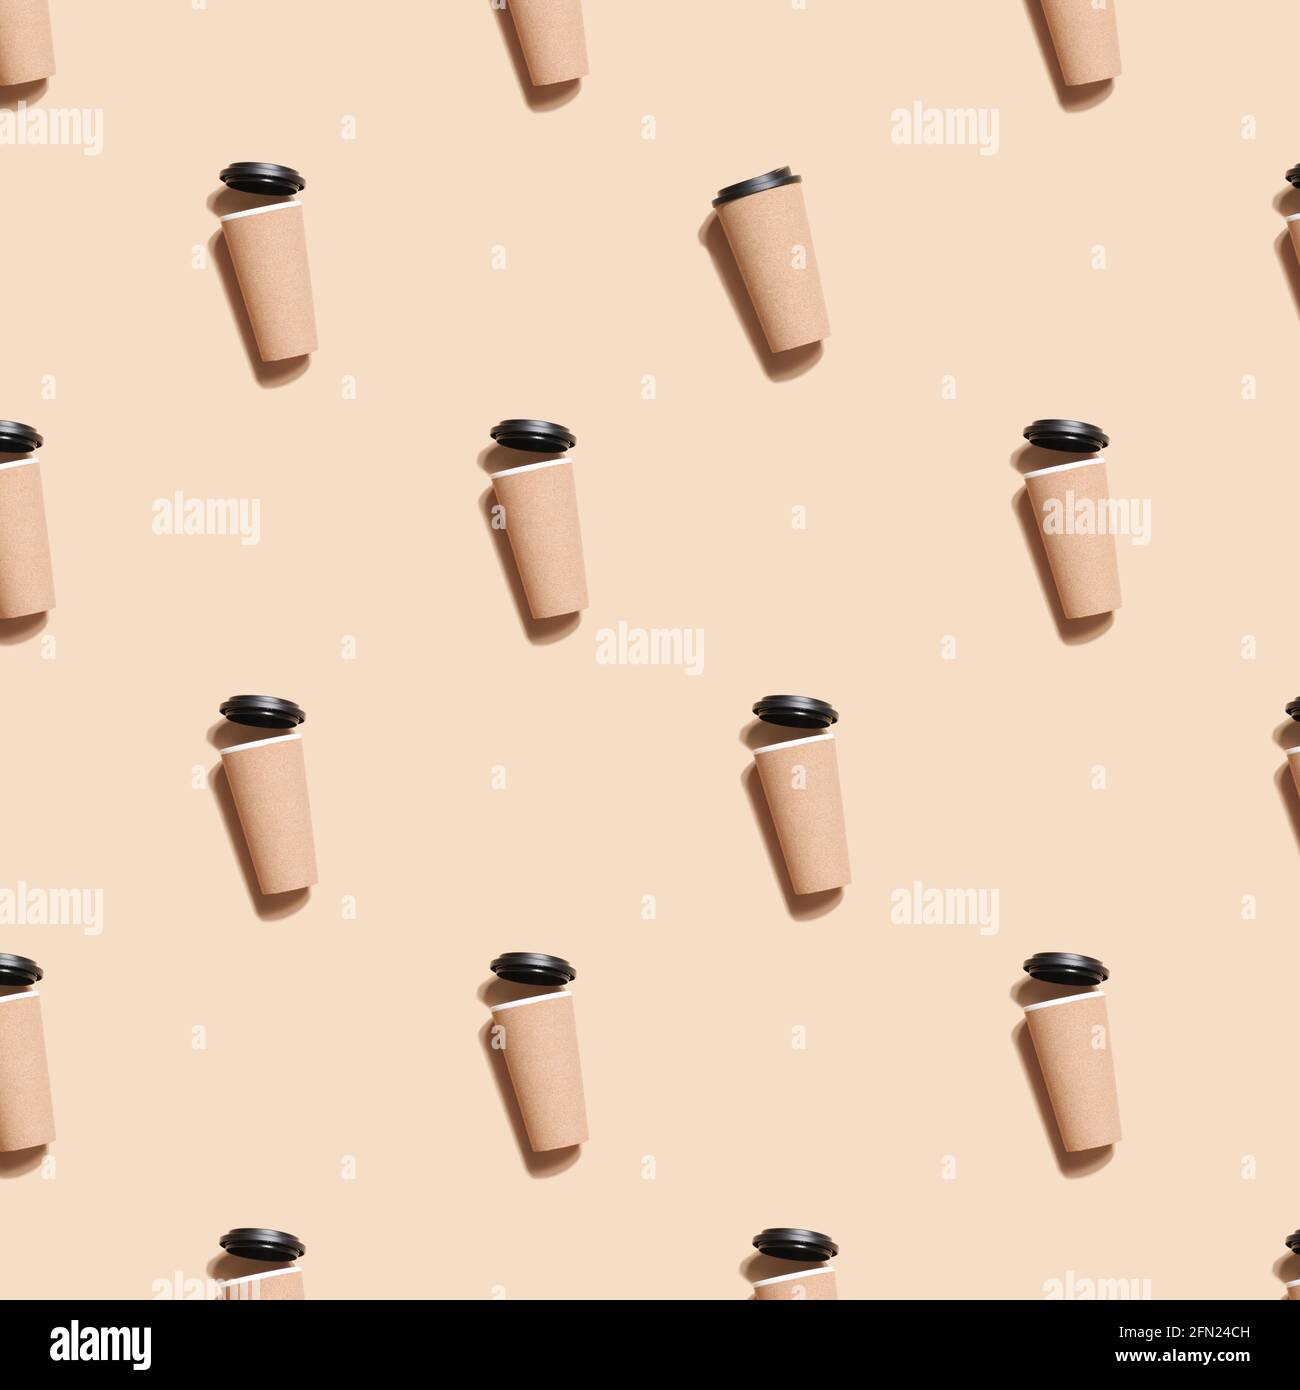 reusable eco coffee or tea cup pattern on beige background. Sustainable lifestyle. Eco friendly and Zero waste concept.Flat lay mock up. Stock Photo